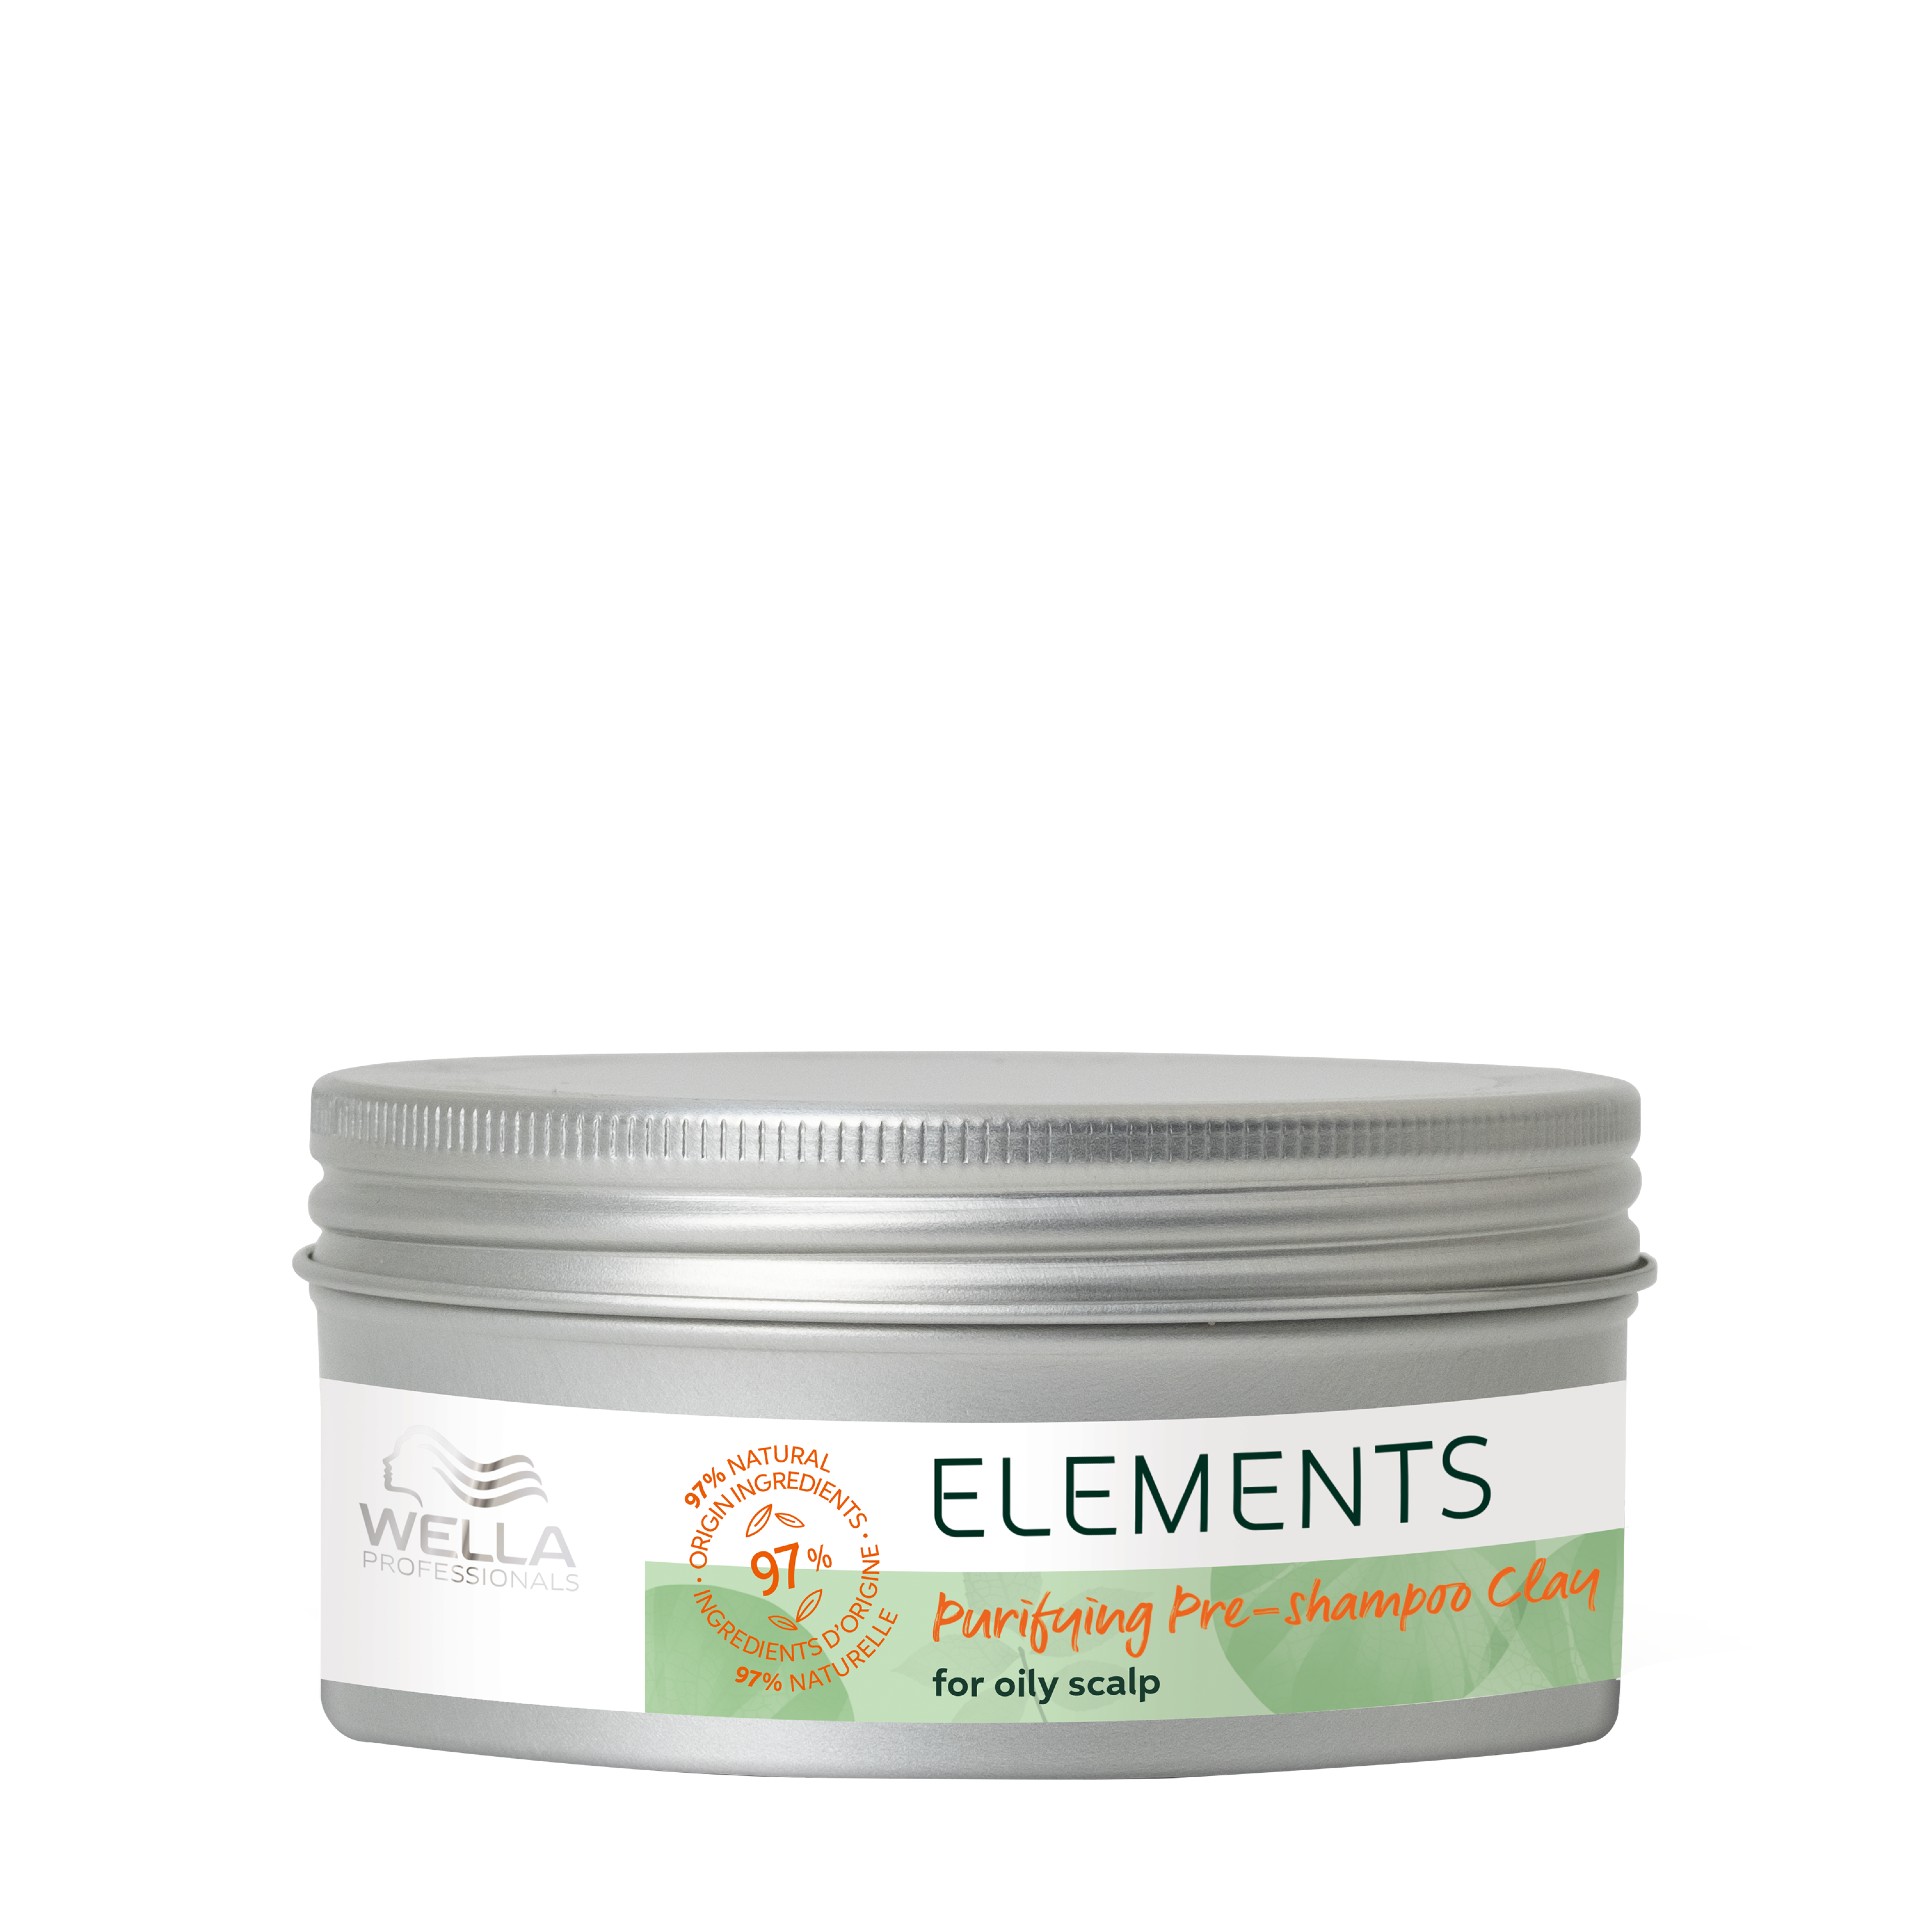 WELLA Professionals Elements Purifying Pre-Shampoo Clay